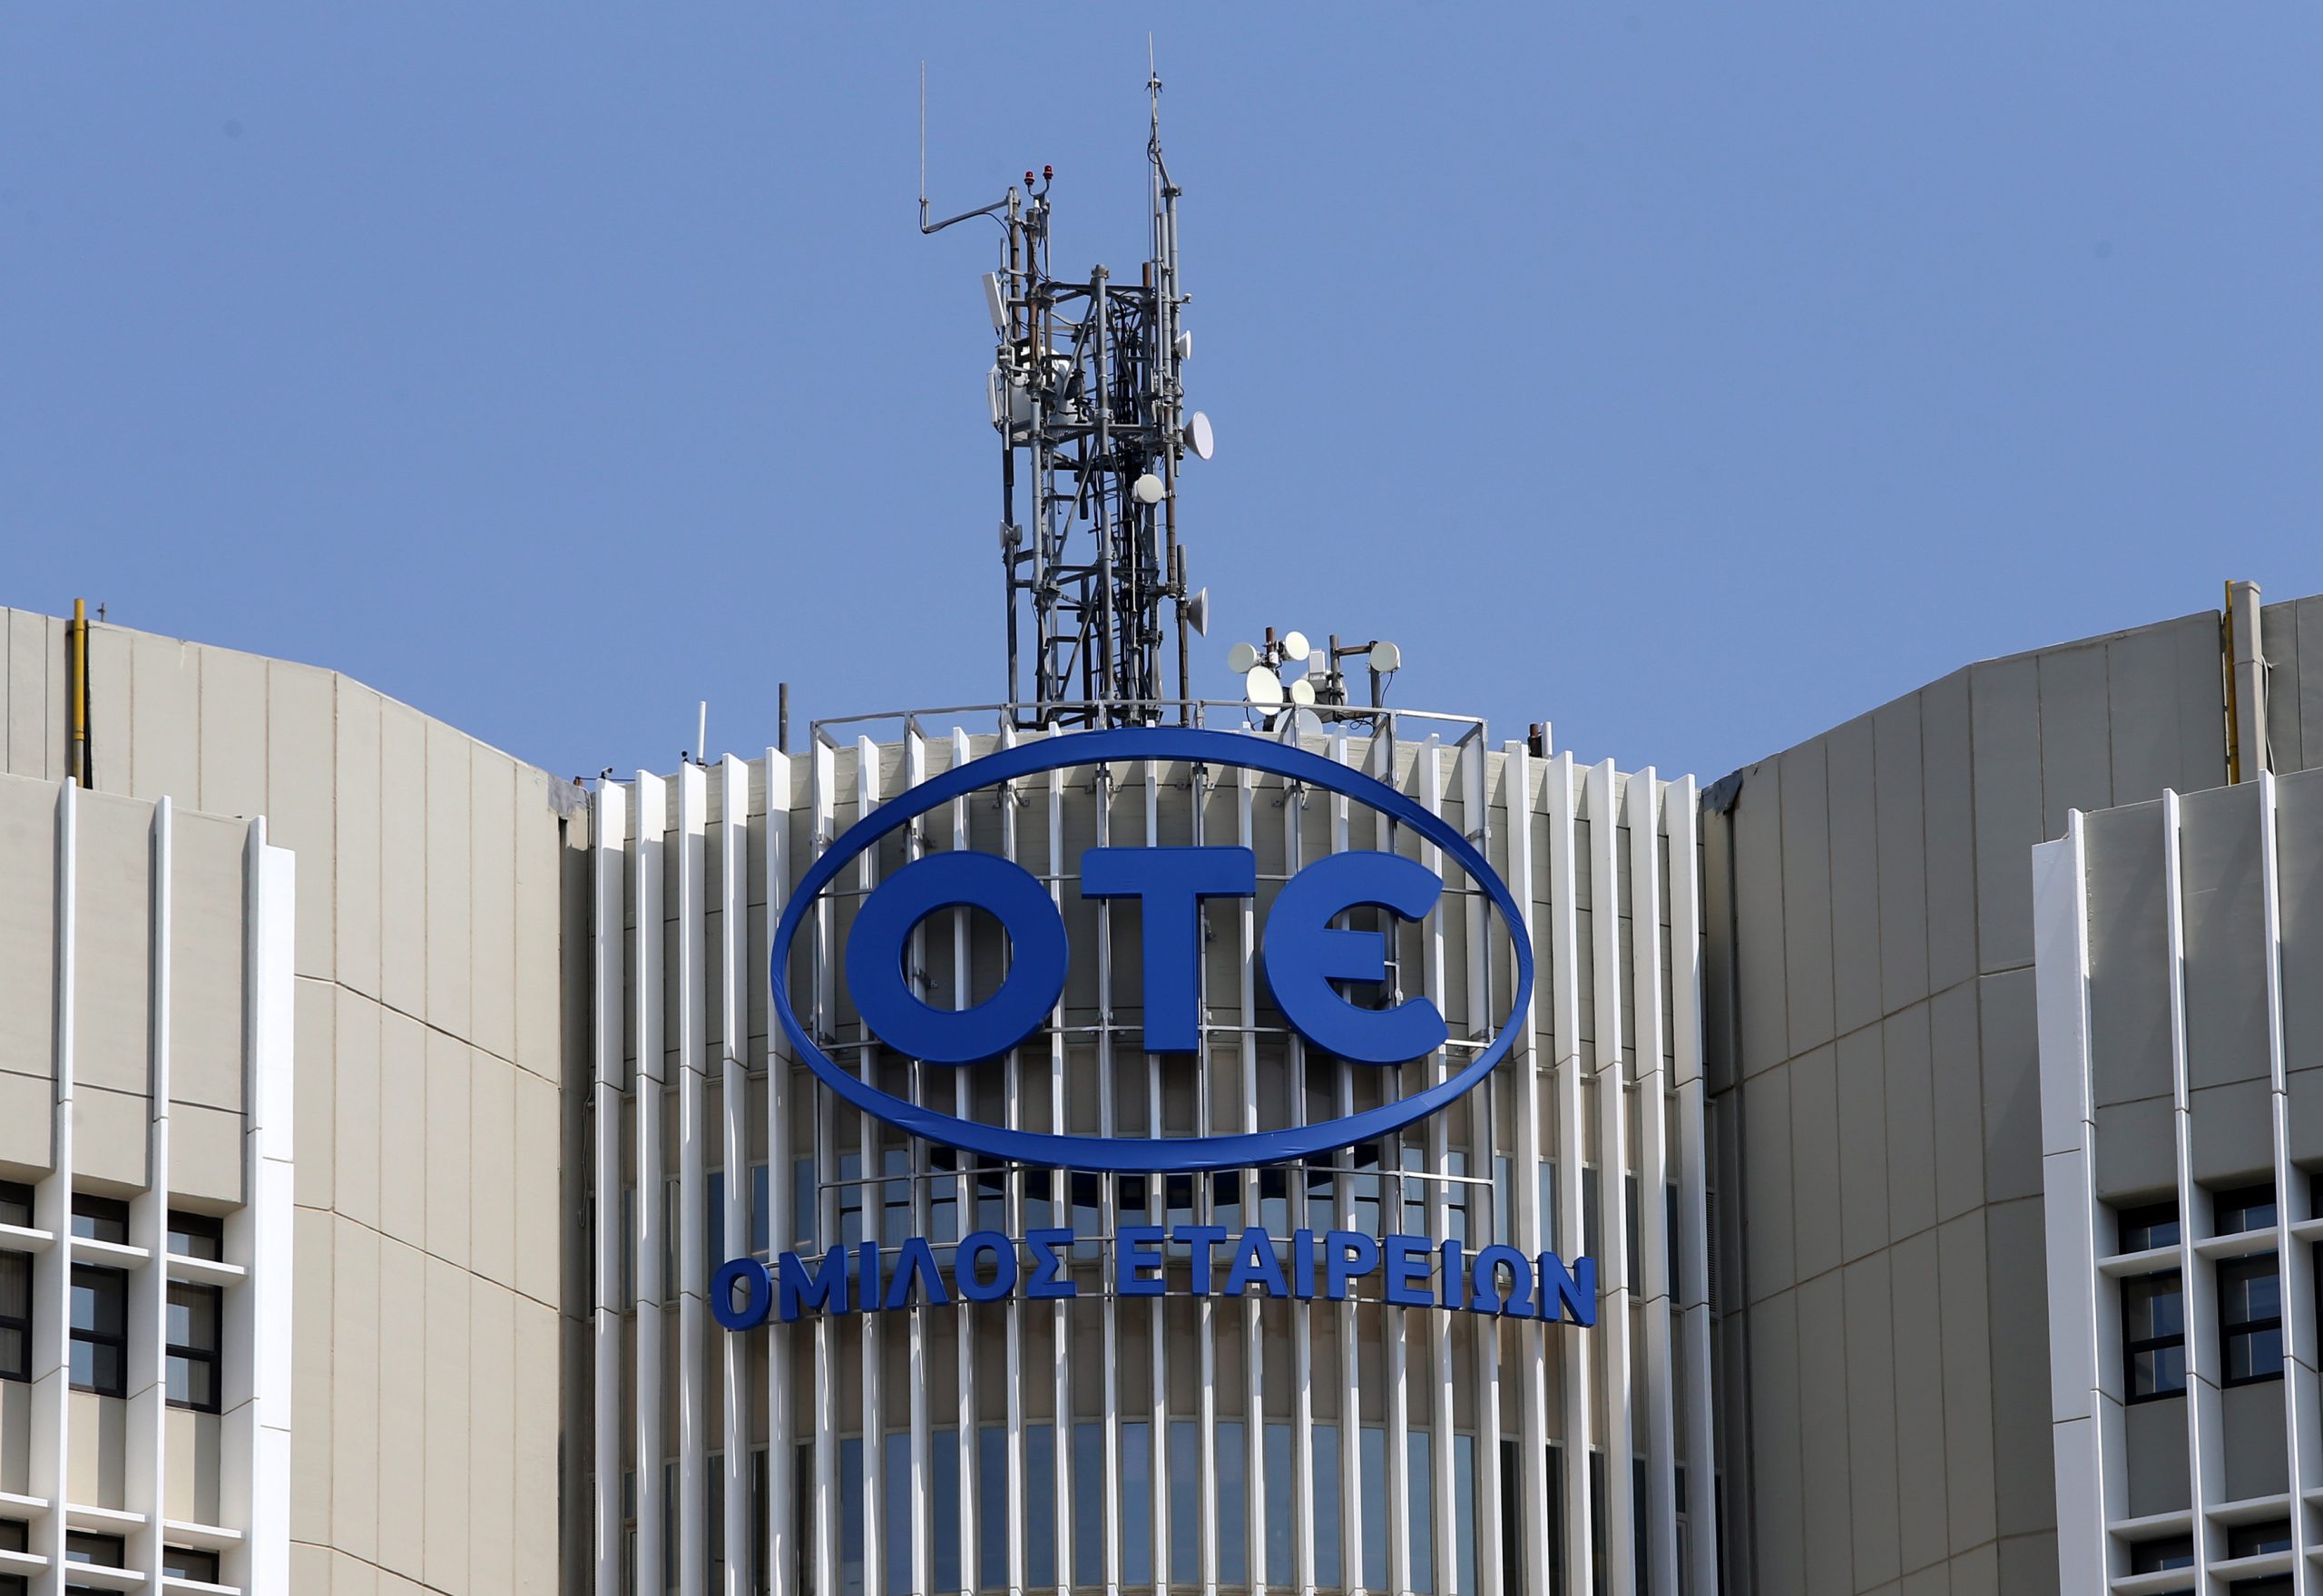 OTE – The shareholders’ remuneration policy is stable after the new investment